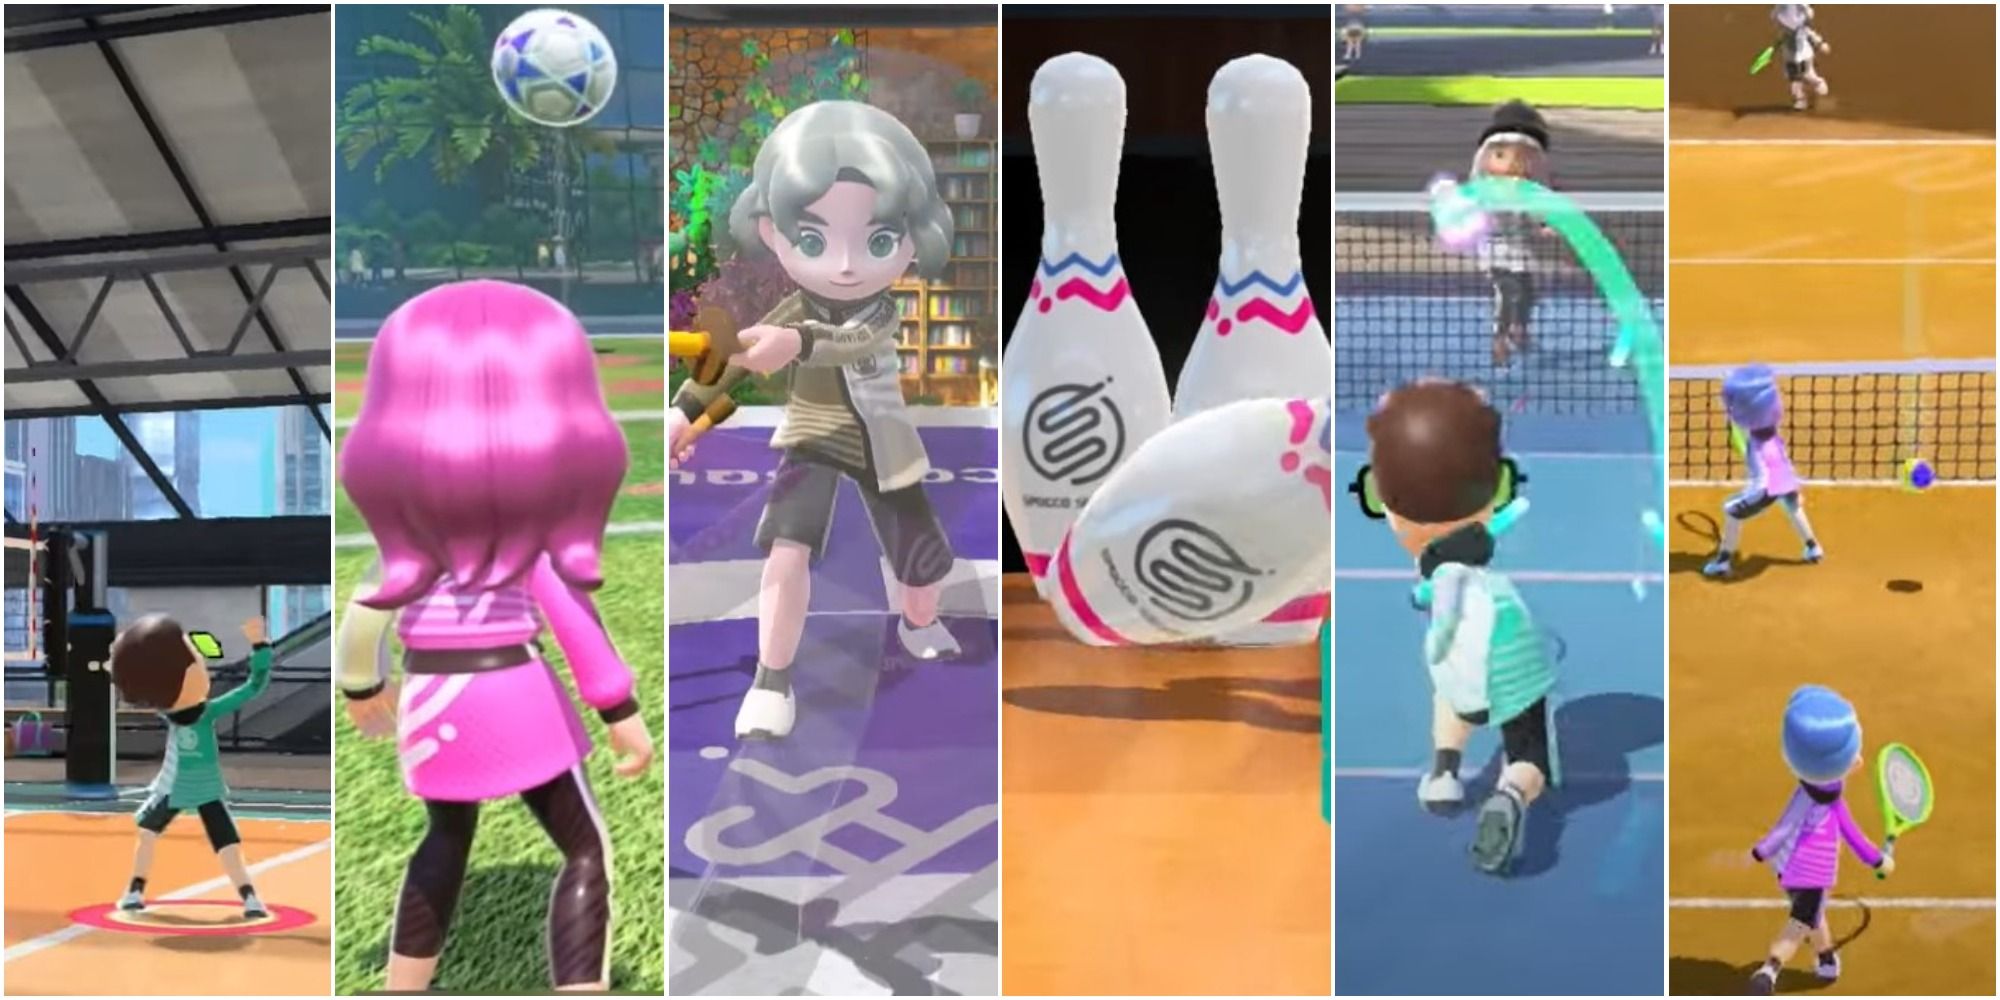 Nintendo Switch Sports Collage Featured image Volleyball Soccer Chambara Bowling Badminton Tennis